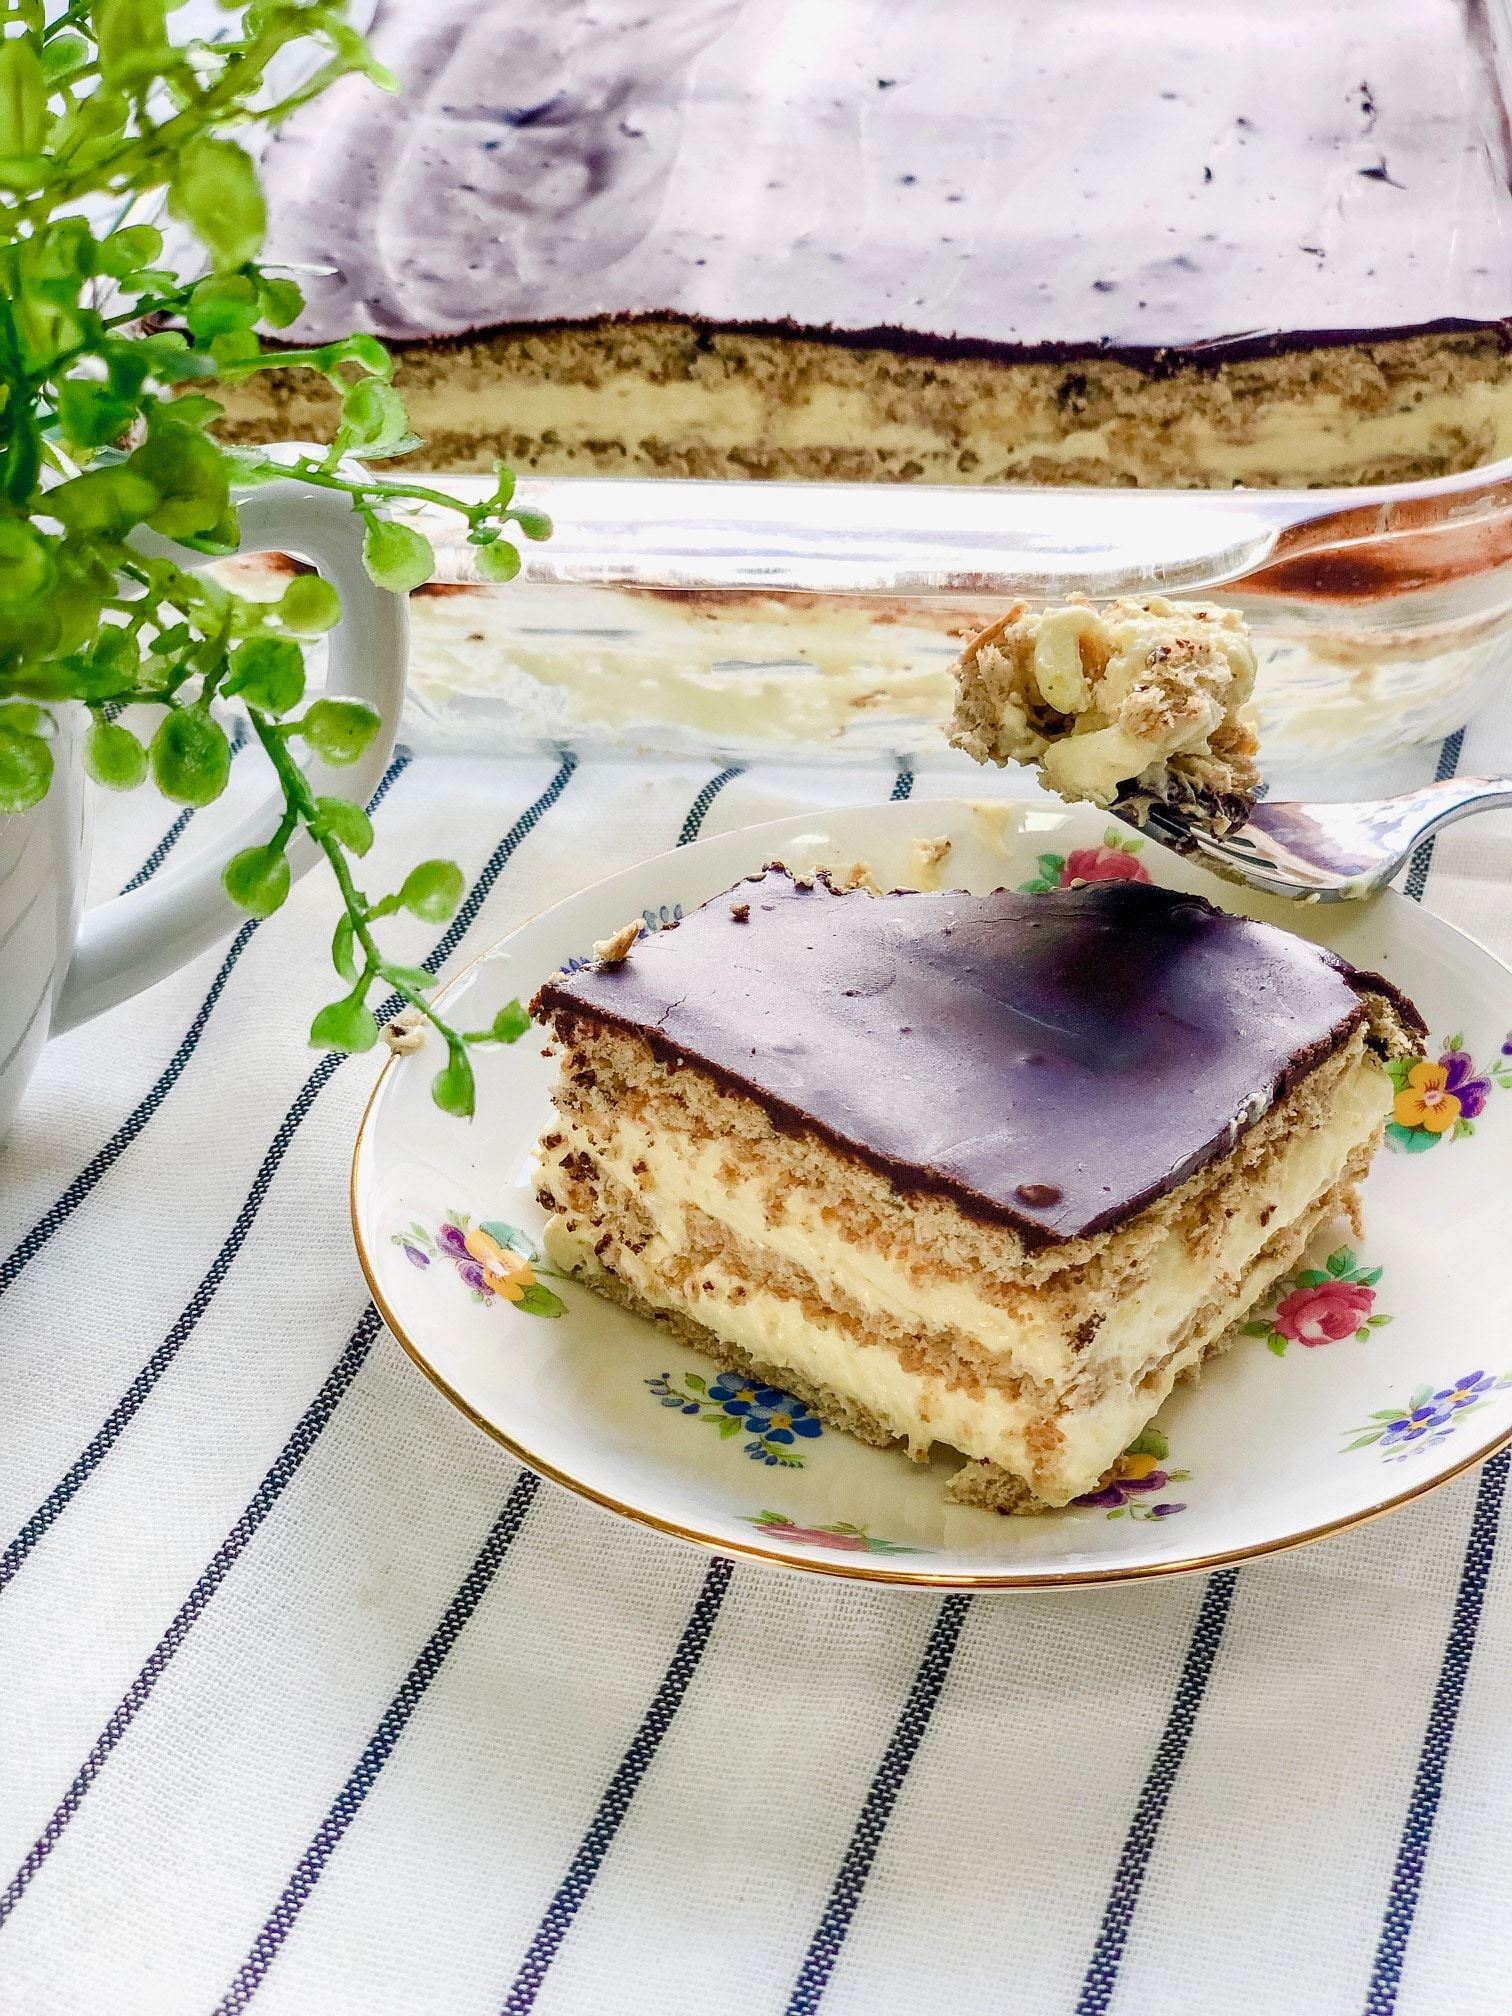 Old Fashioned Chocolate Eclair Cake